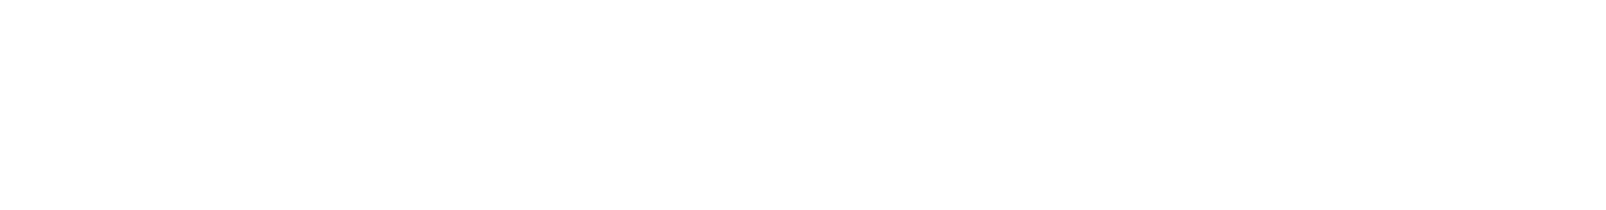 Forbes Japan DX SUMMIT 2021